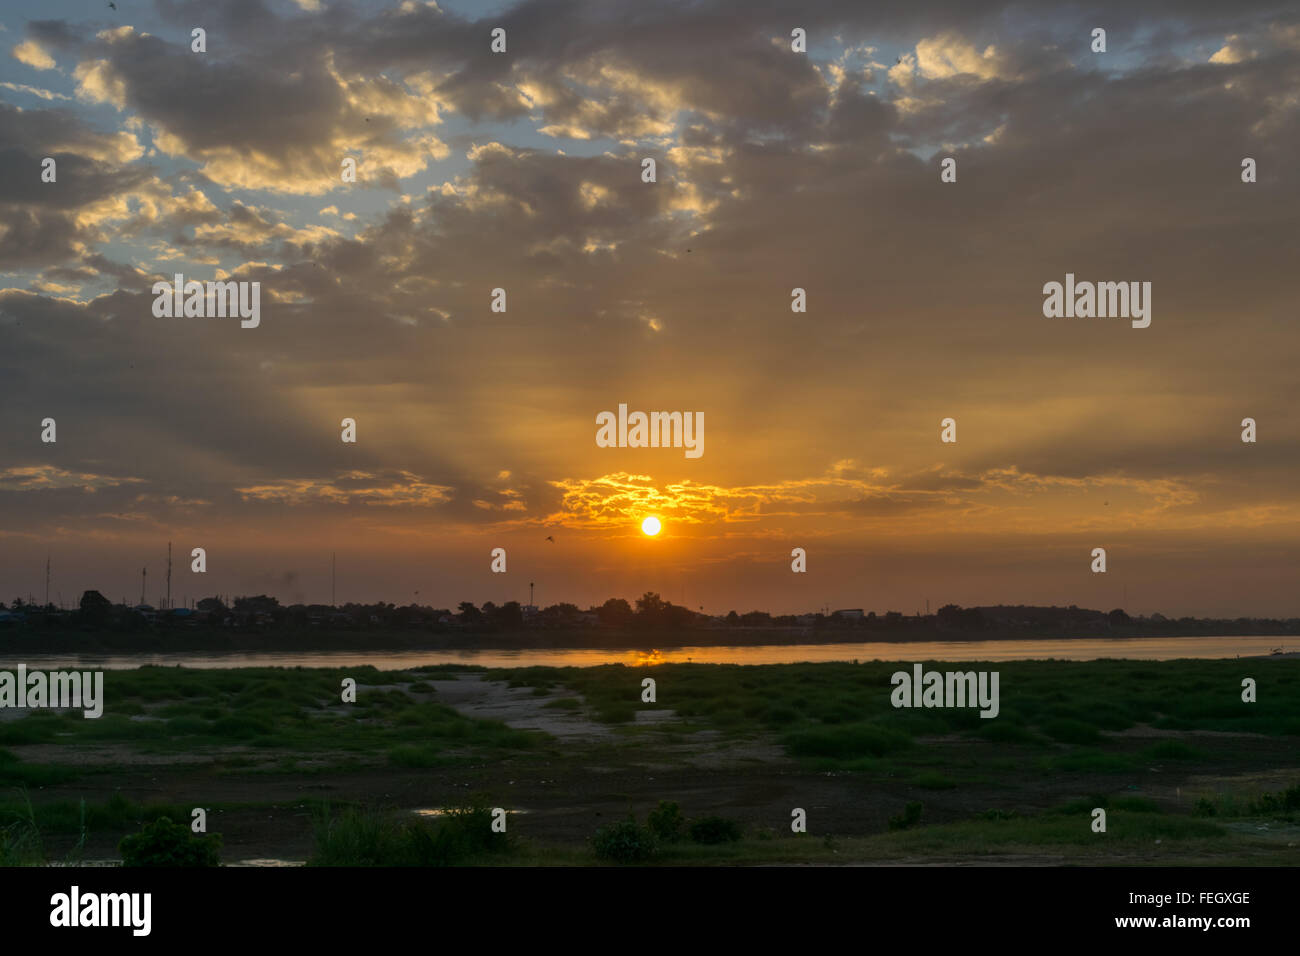 Sunset at the Mekong river look from Laos to Thailand. Stock Photo